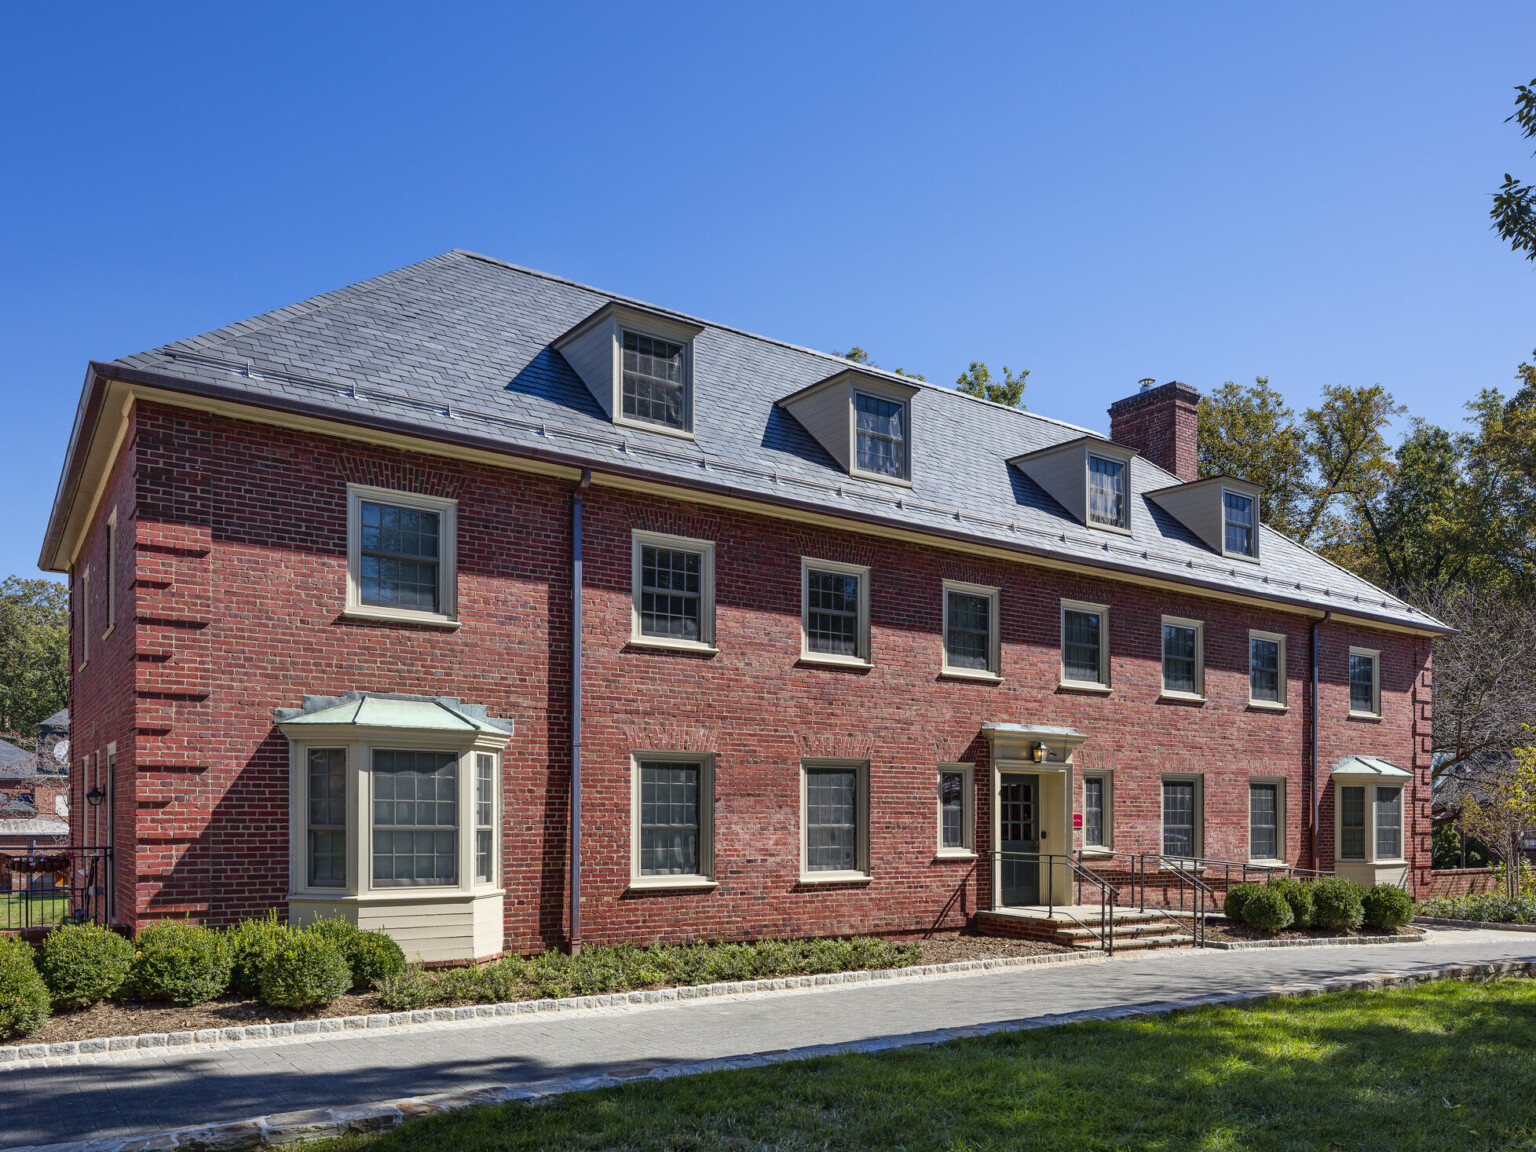 exterior view of three-story Georgian inspired brick dormitory building, blue skies, landscaping, tall trees and grassy knoll